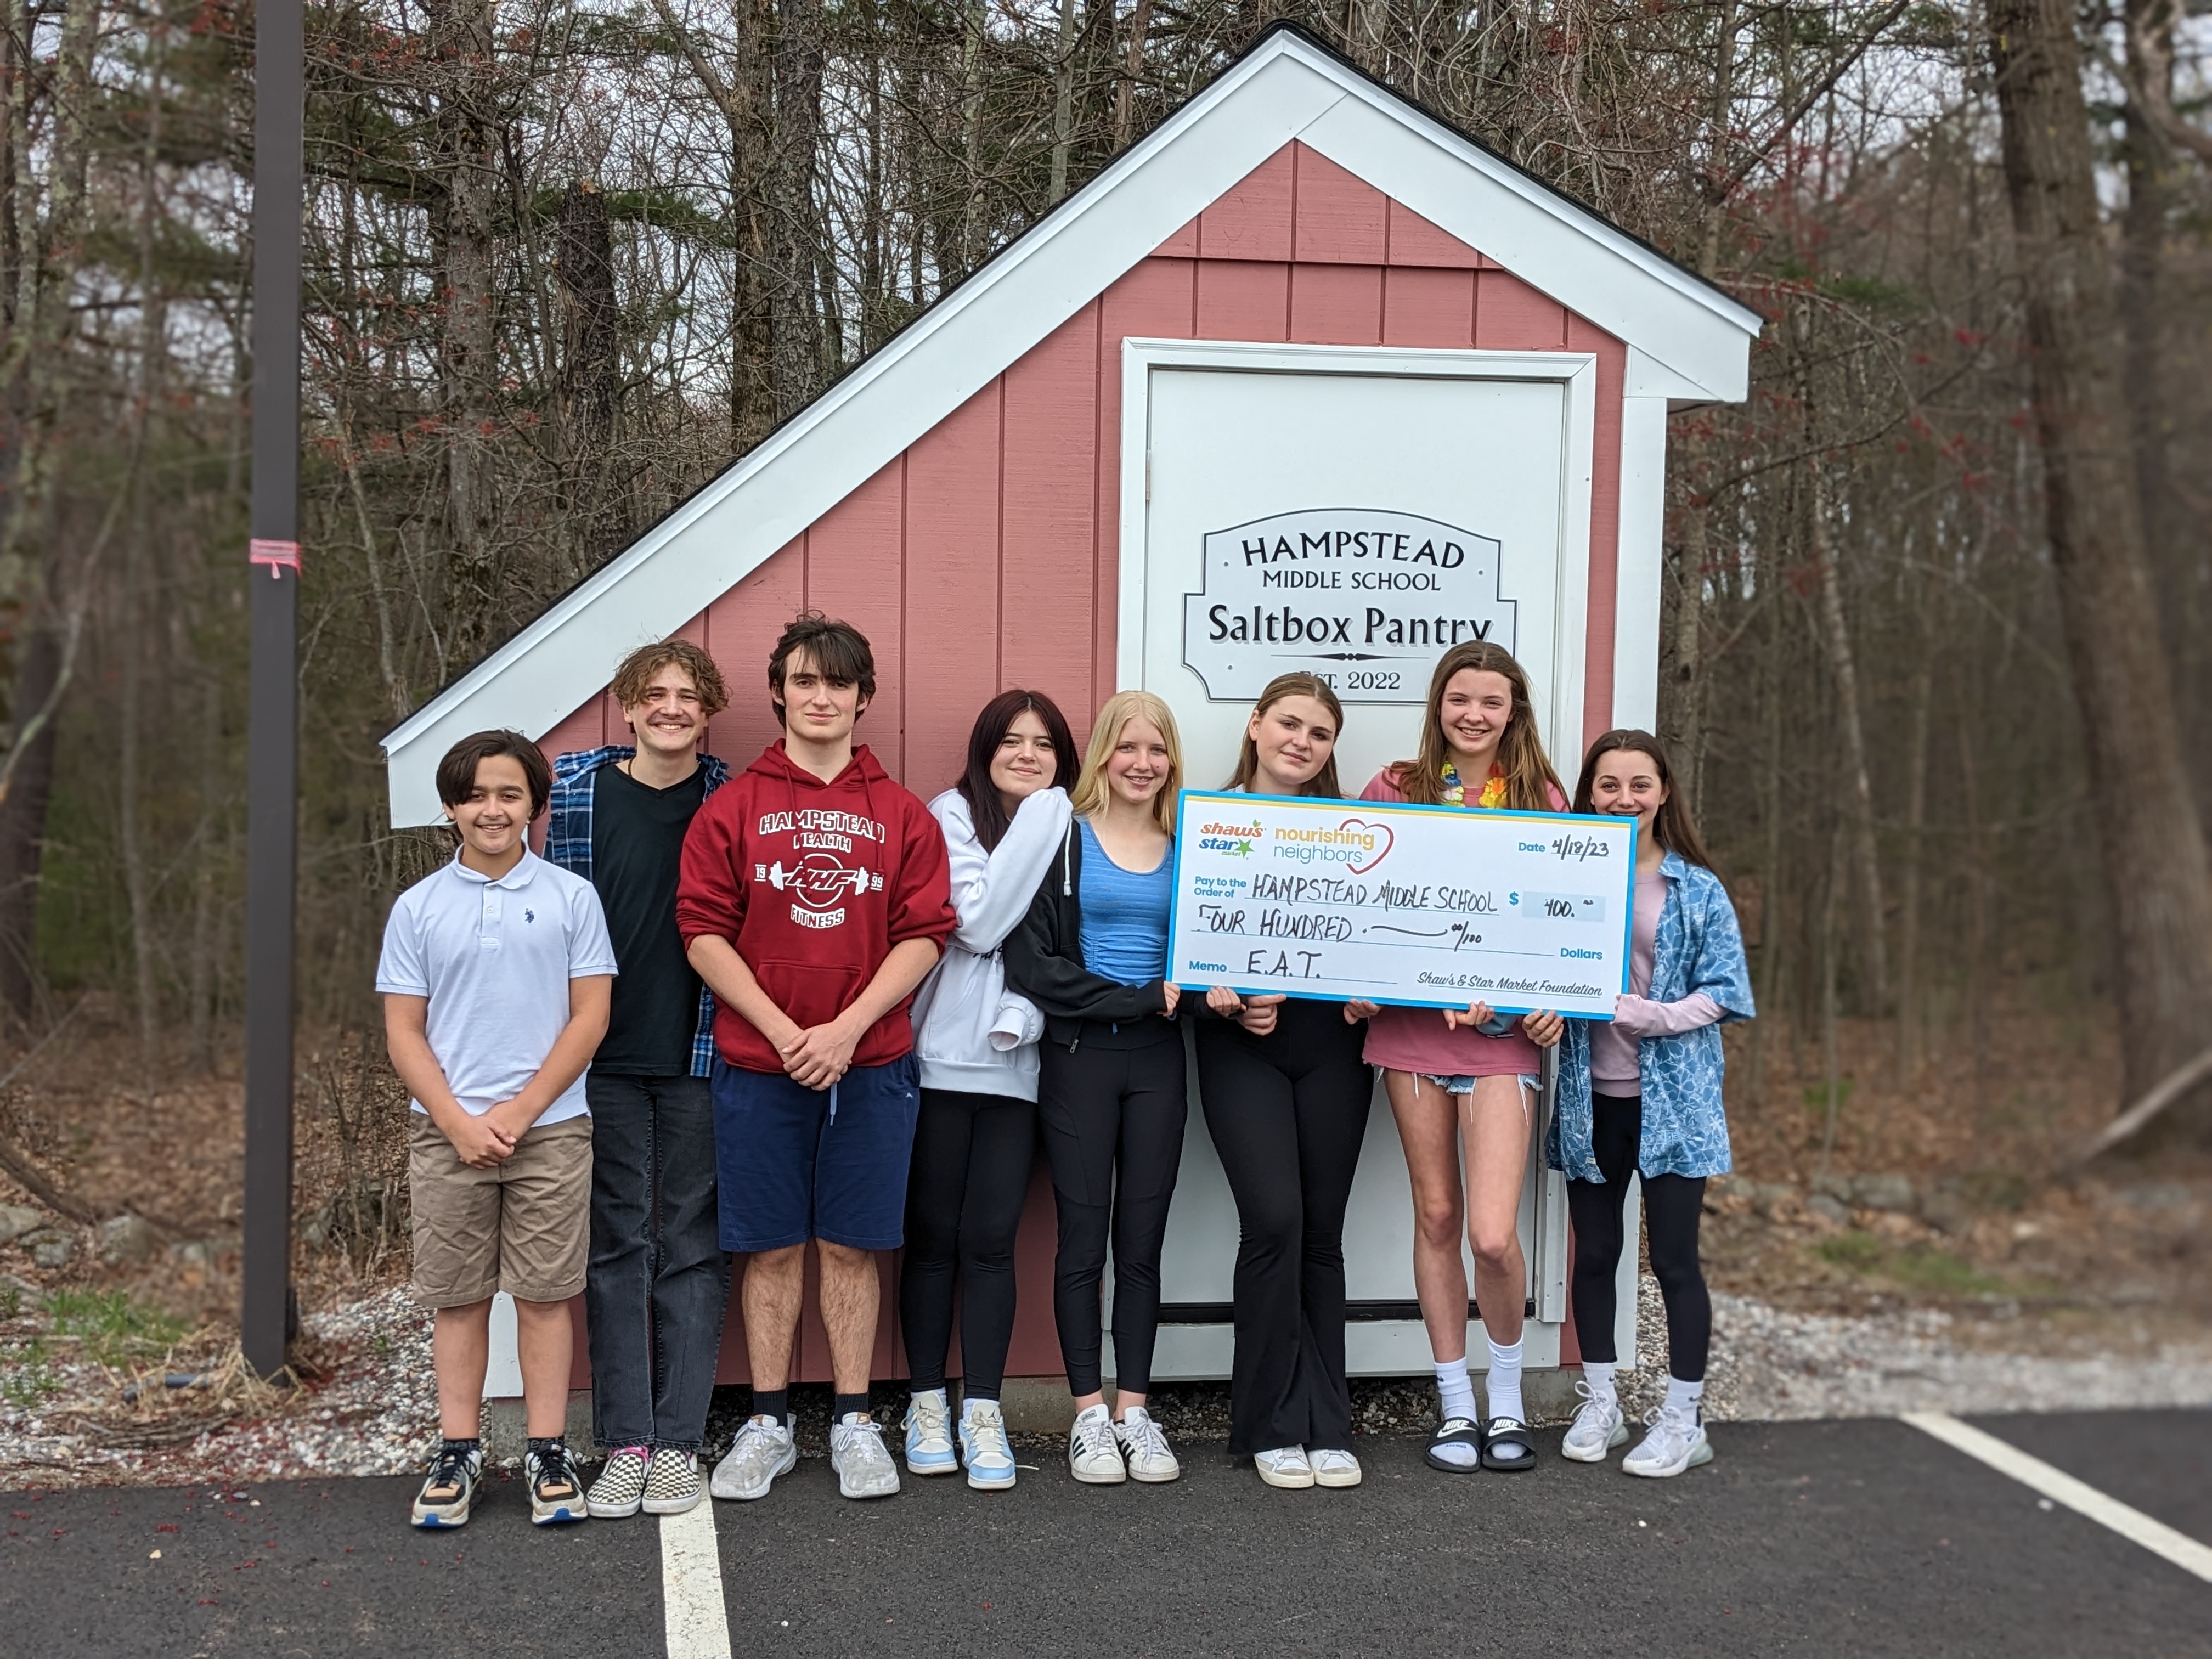 Hampstead Middle School students standing in front of the Saltbox Pantry food pantry they had worked on. They are holding a large check from Shaw's donating money to the school.